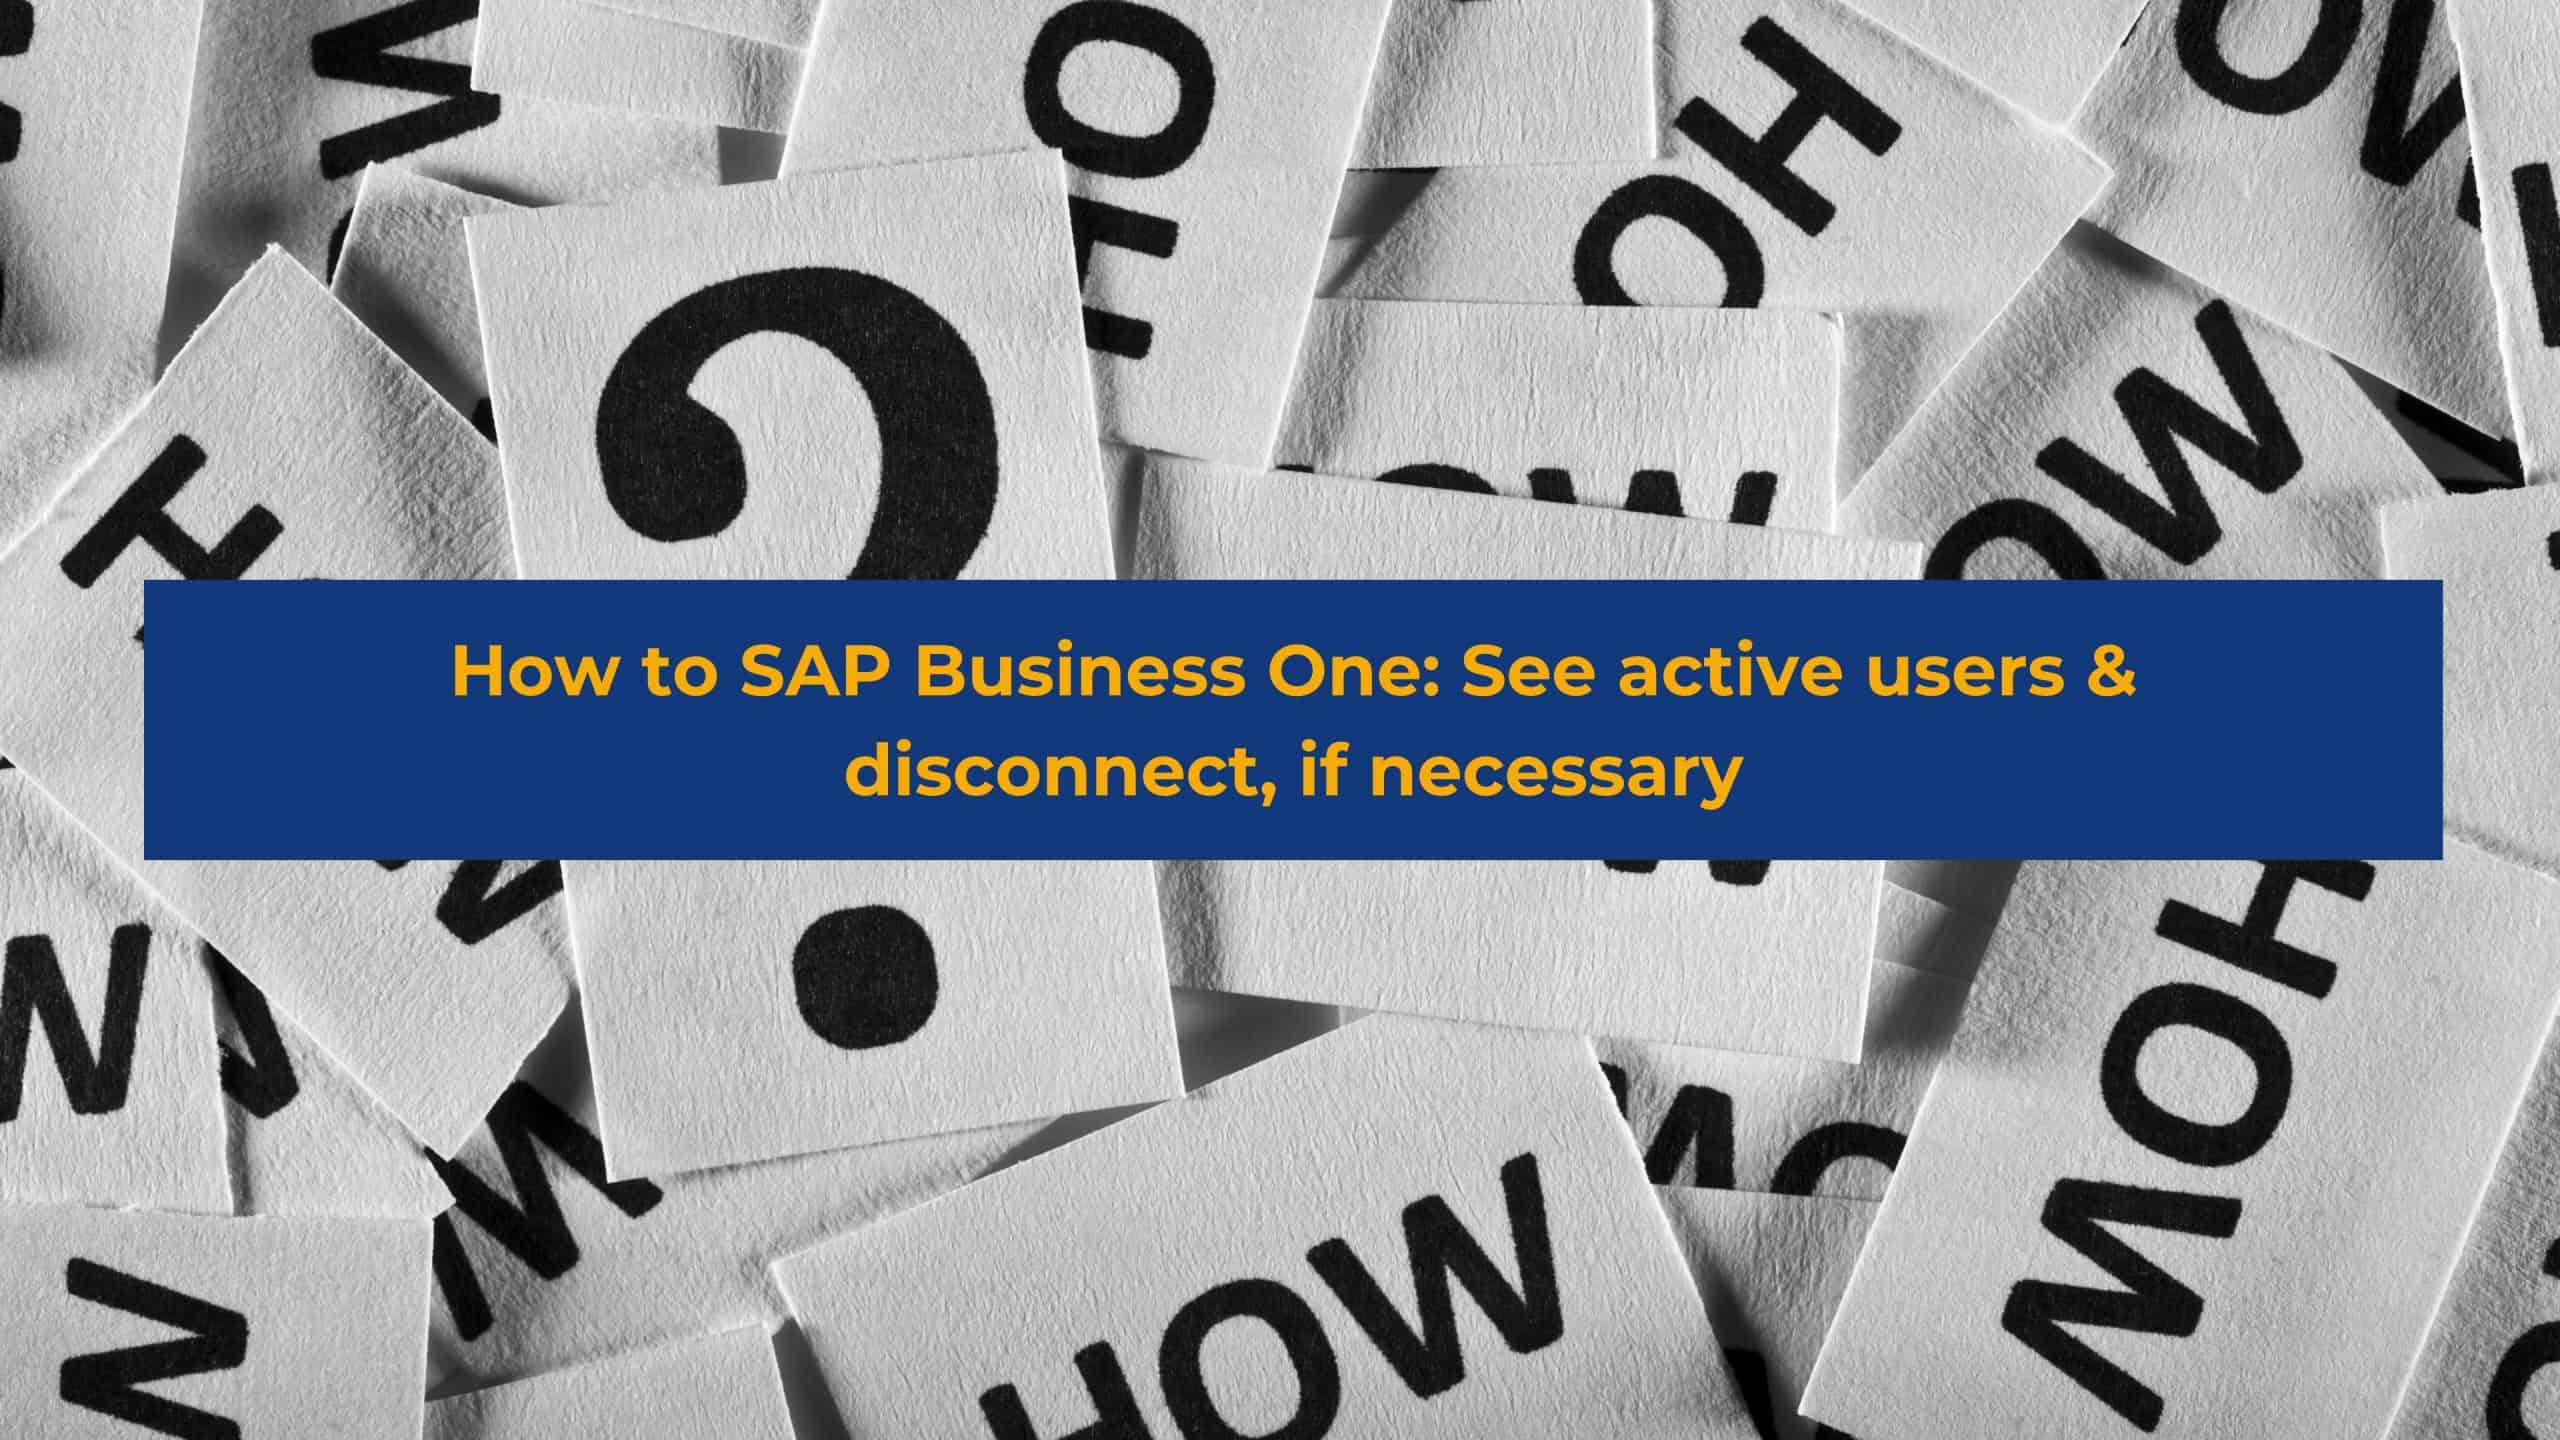 How to SAP Business One: See active users & disconnect, if necessary